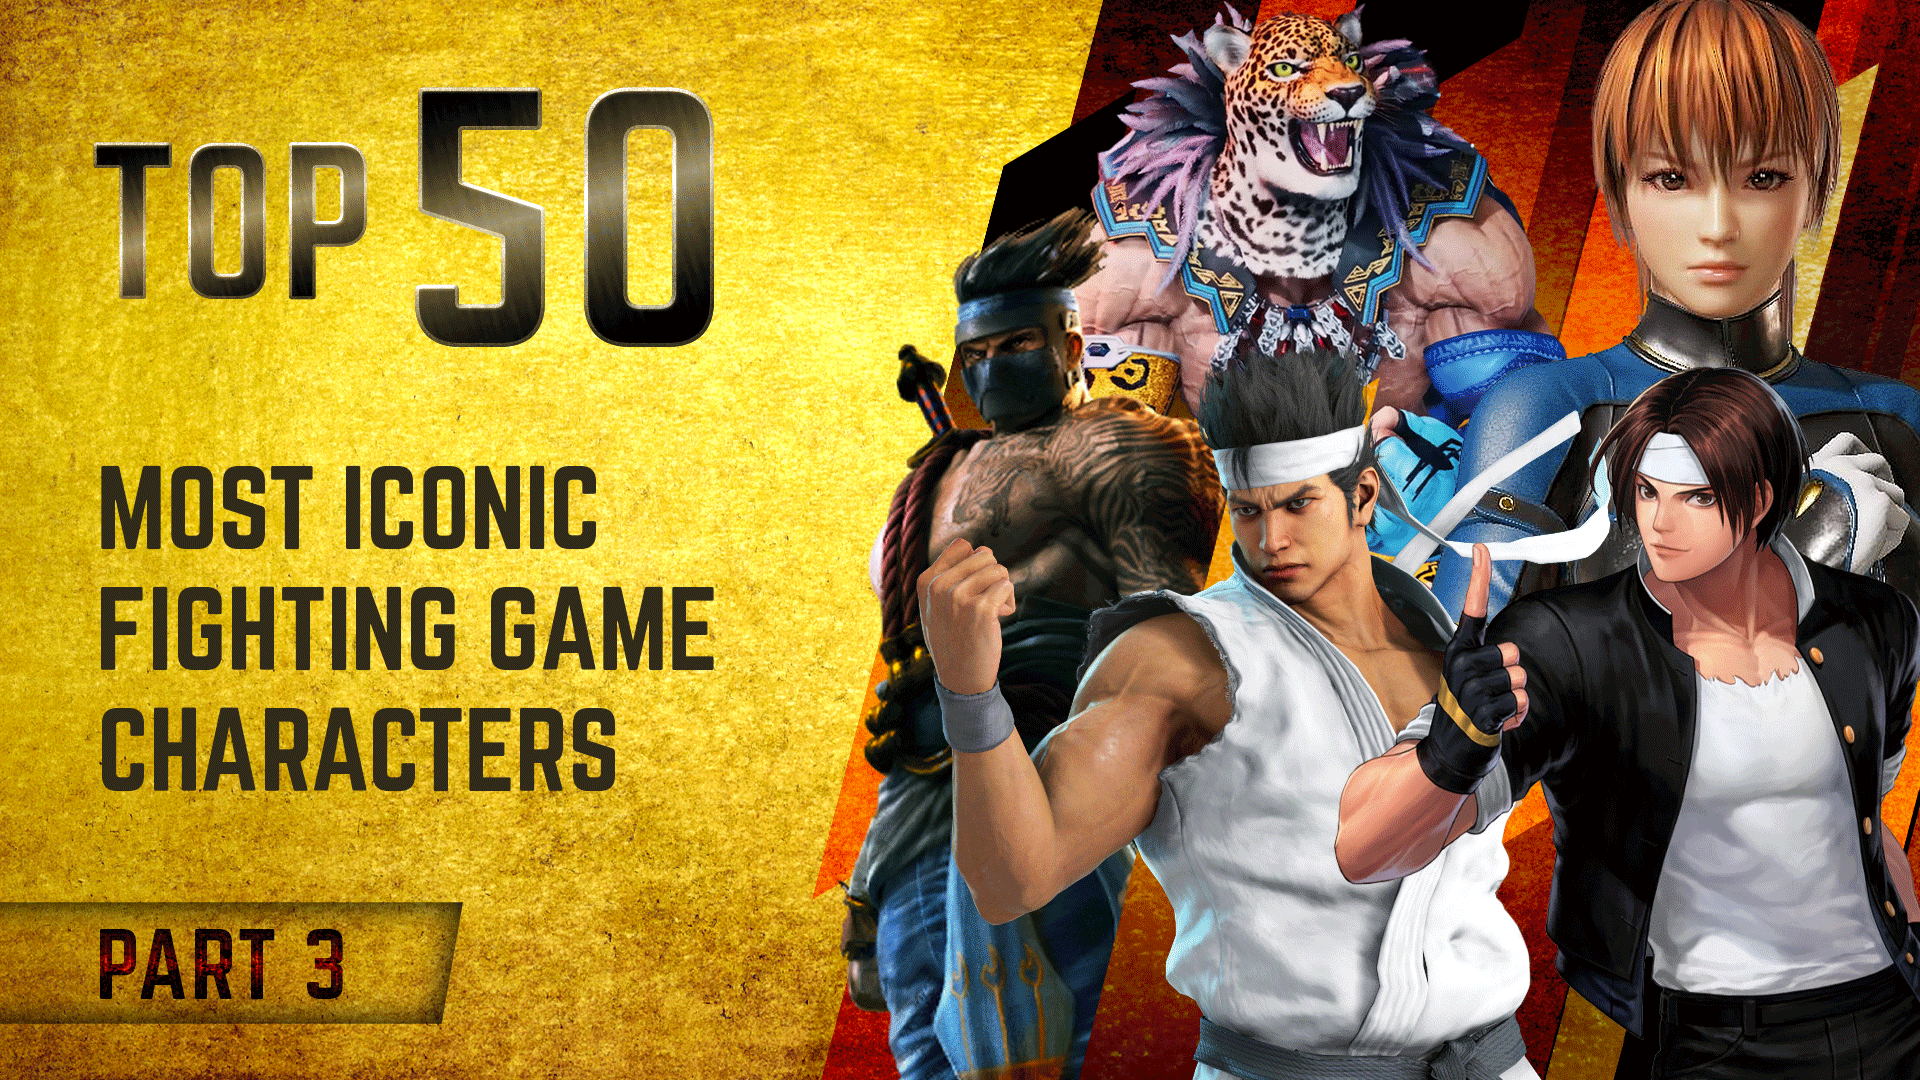 Top 50 Most Iconic Fighting Game Characters - Part 3